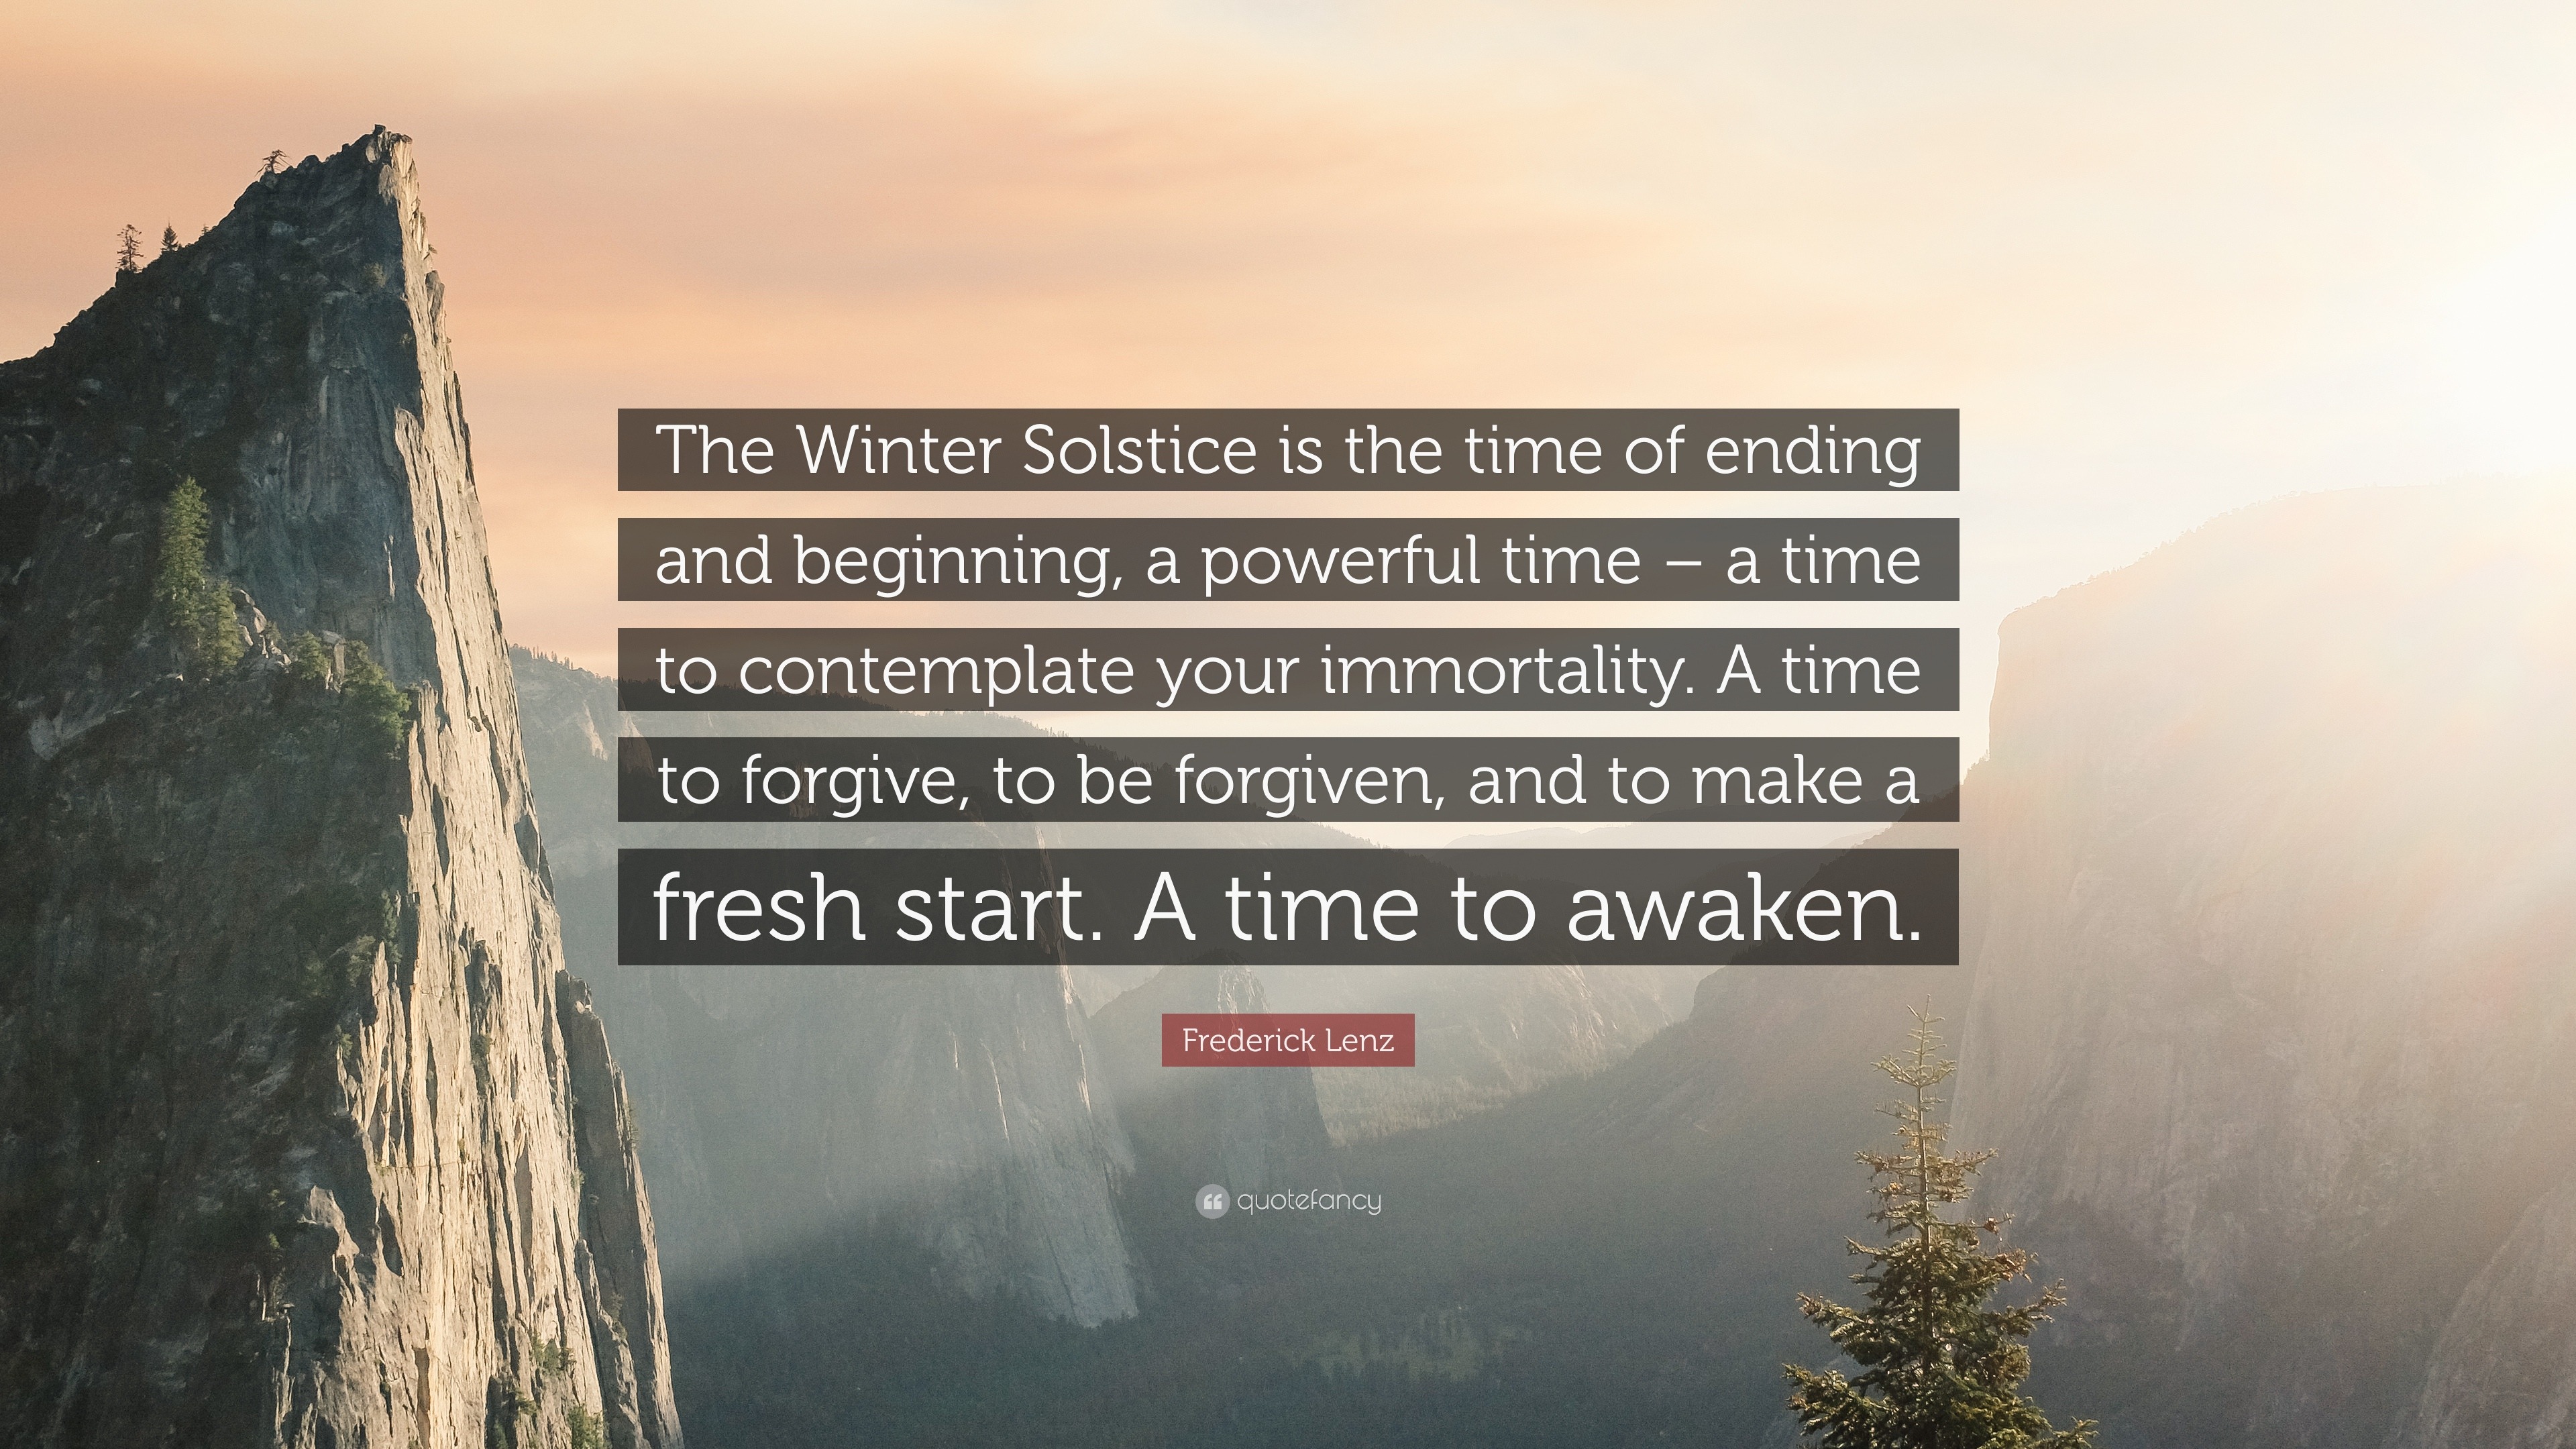 Frederick Lenz Quote “The Winter Solstice is the time of ending and